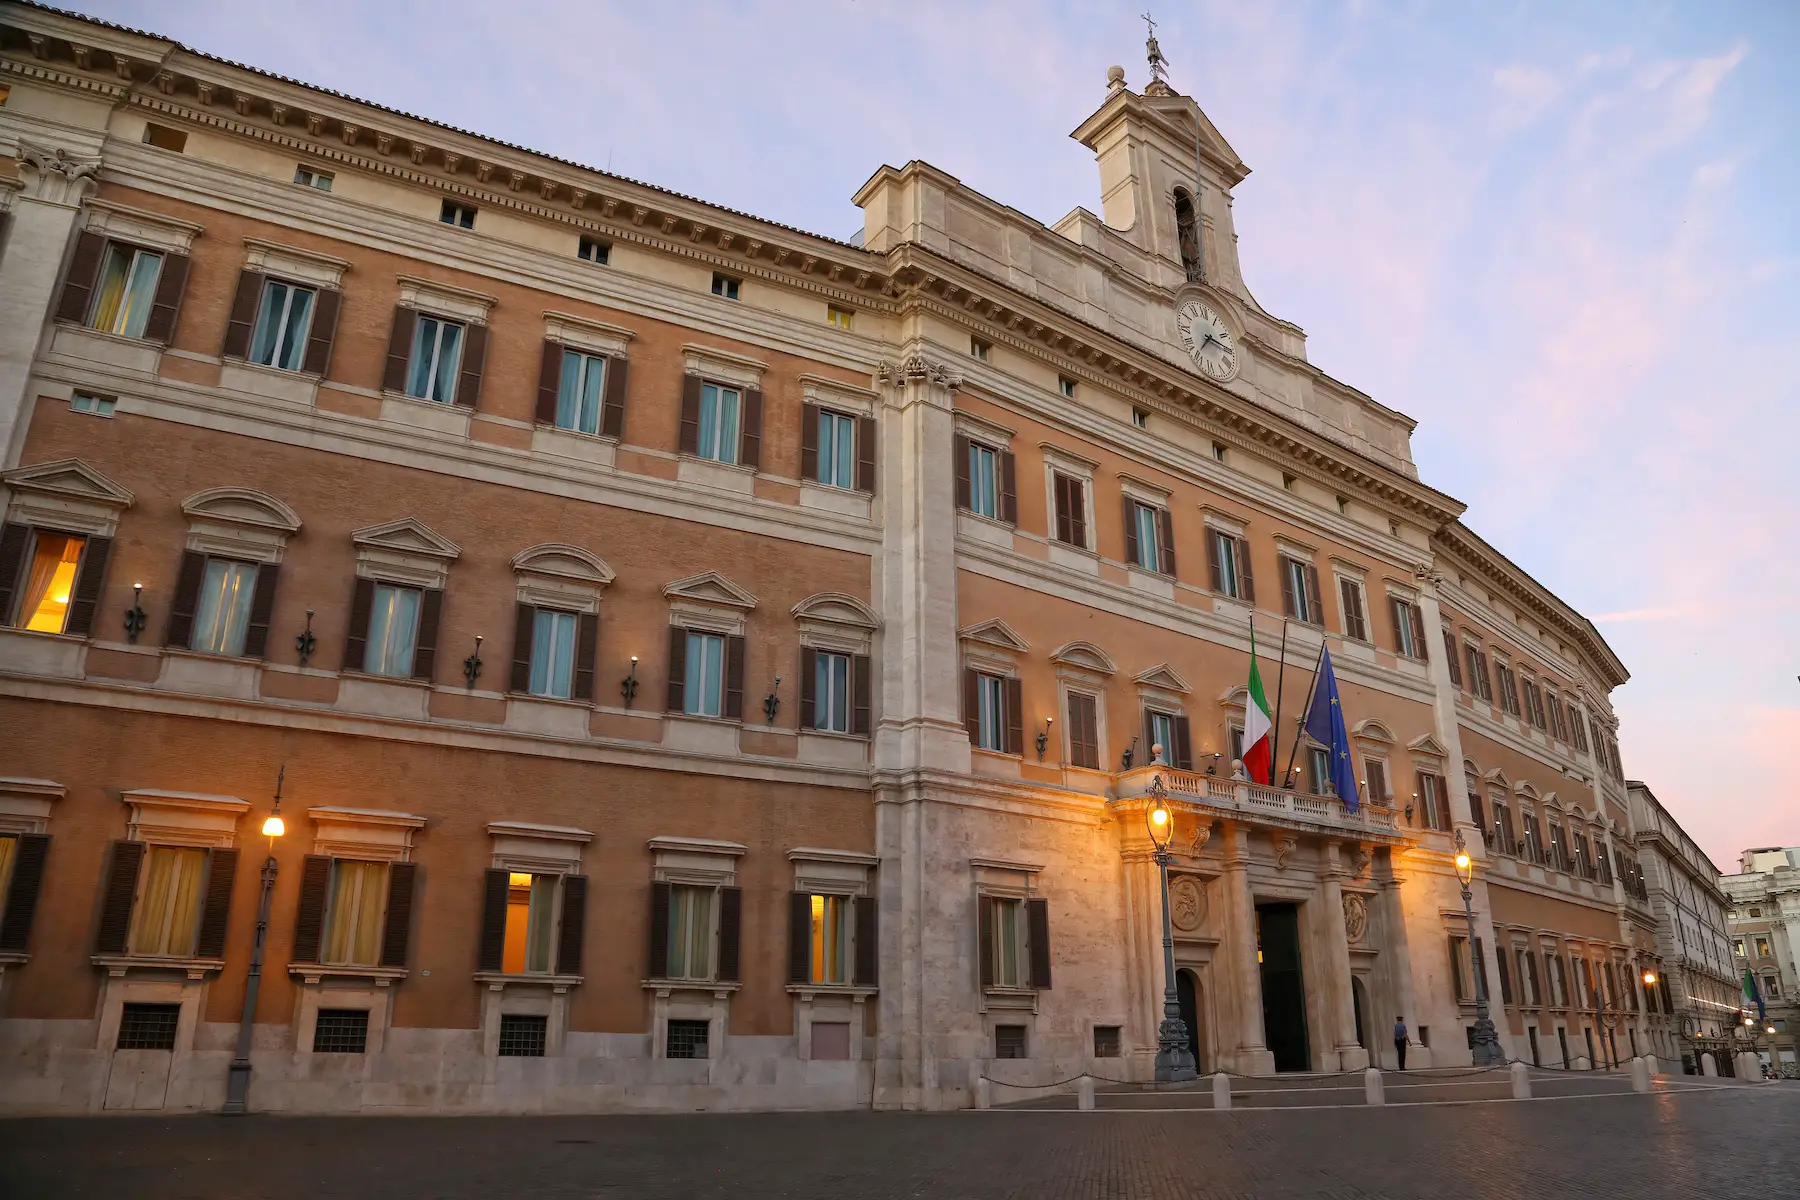 The Italian parliament building in Rome is shown at sunset, an Italian and European Union flag each displayed over the main entrance